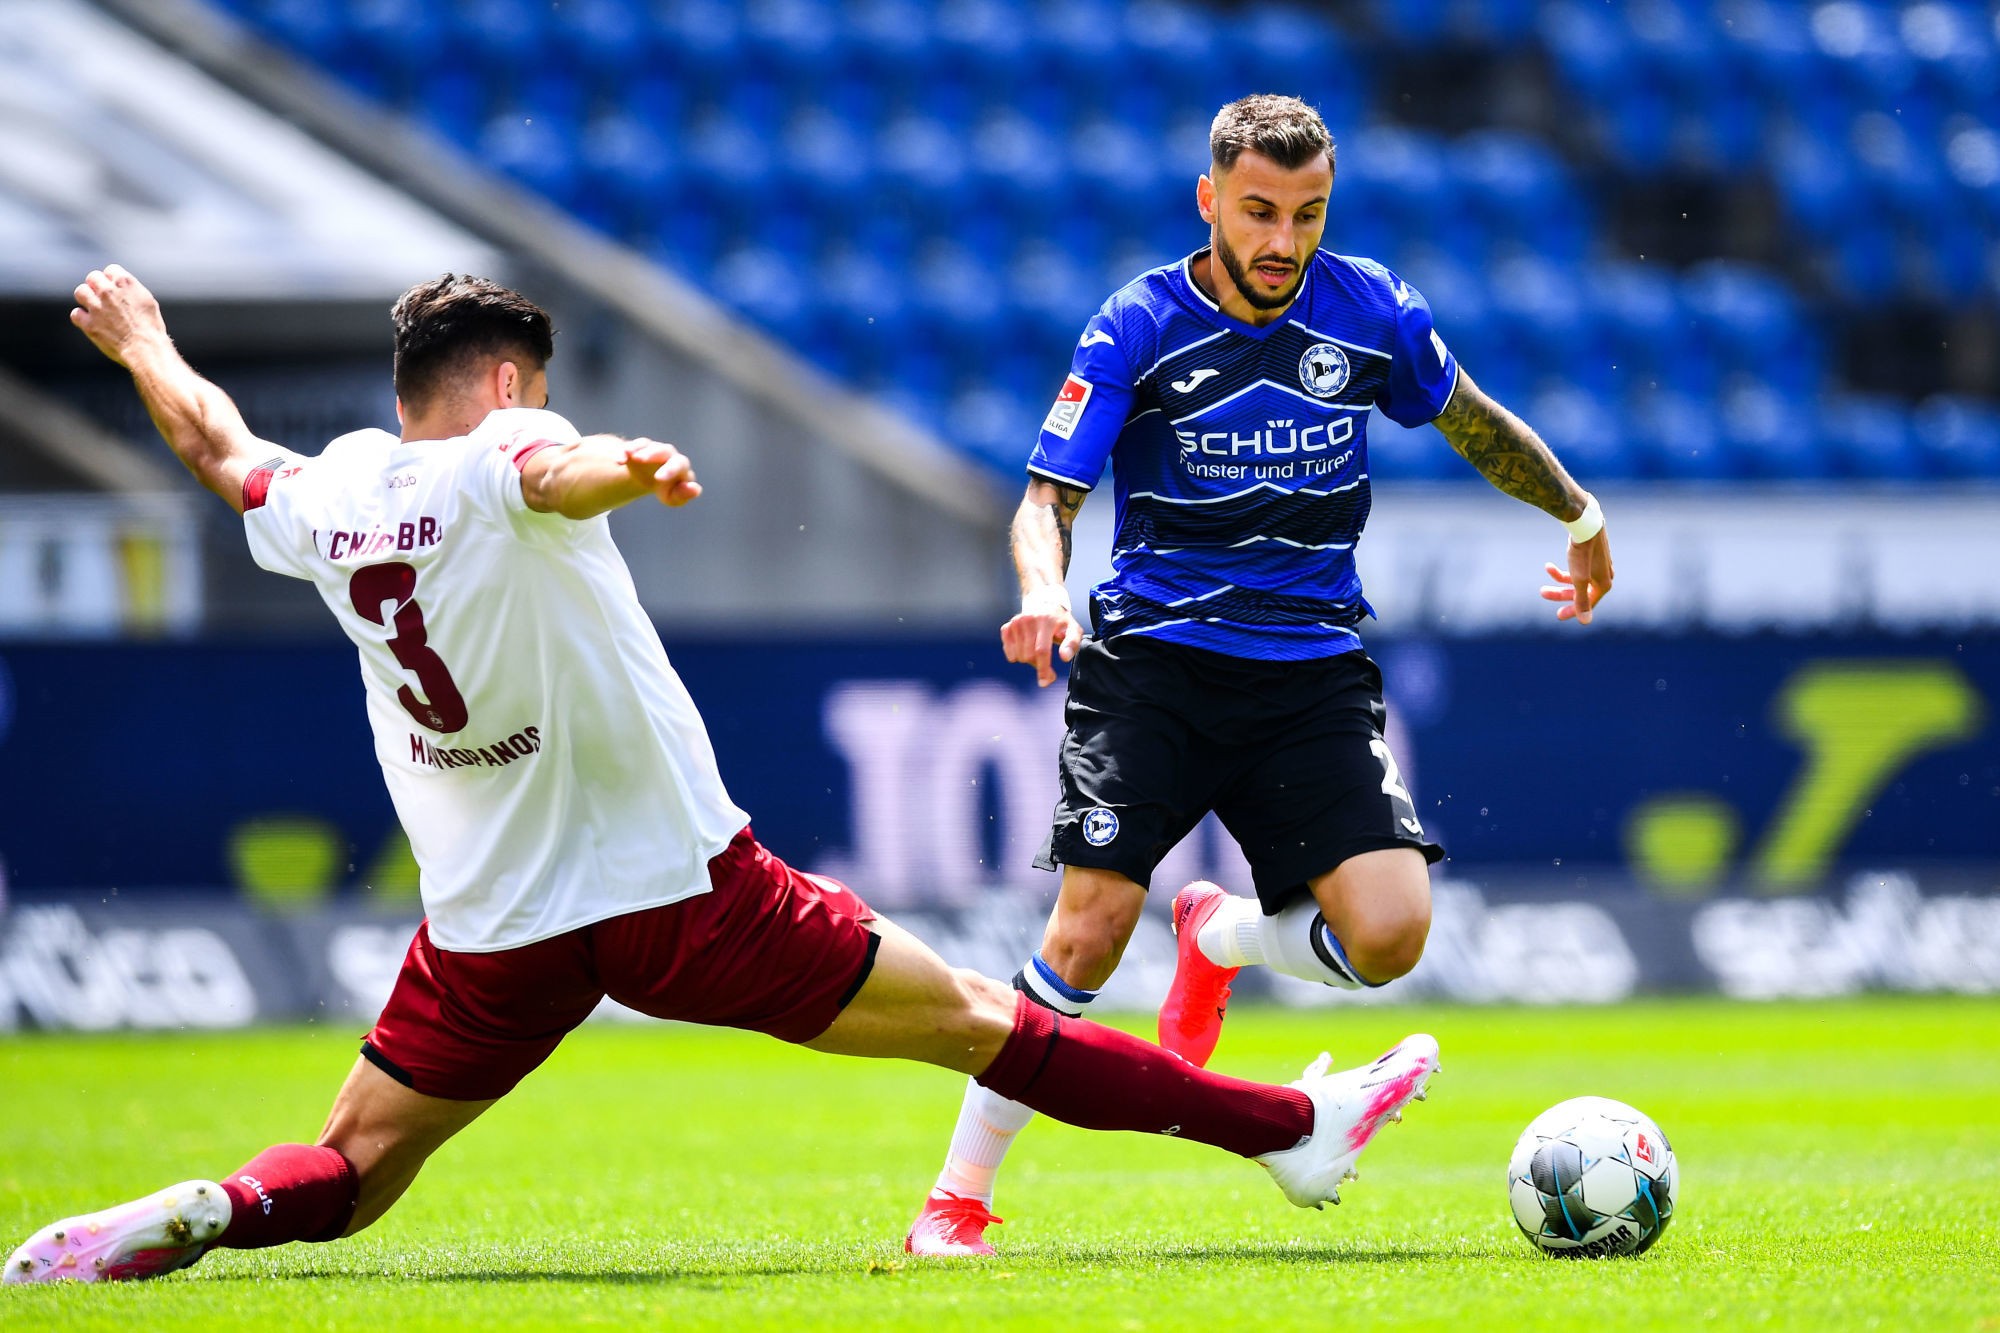 06 June 2020, North Rhine-Westphalia, Bielefeld: Football: 2nd Bundesliga, Arminia Bielefeld - 1st FC N¸rnberg, 30th matchday in the Sch¸ko Arena. Konstantinos Mavropanos (l) from Nuremberg against Jonathan Clauss from Arminia Bielefeld. Photo: Stuart Franklin/getty/Pool/dpa - IMPORTANT NOTE: In accordance with the regulations of the DFL Deutsche Fu?ball Liga and the DFB Deutscher Fu?ball-Bund, it is prohibited to exploit or have exploited in the stadium and/or from the game taken photographs in the form of sequence images and/or video-like photo series. 


Photo by Icon Sport - Konstantinos MAVROPANOS - Jonathan CLAUSS -  (Allemagne)